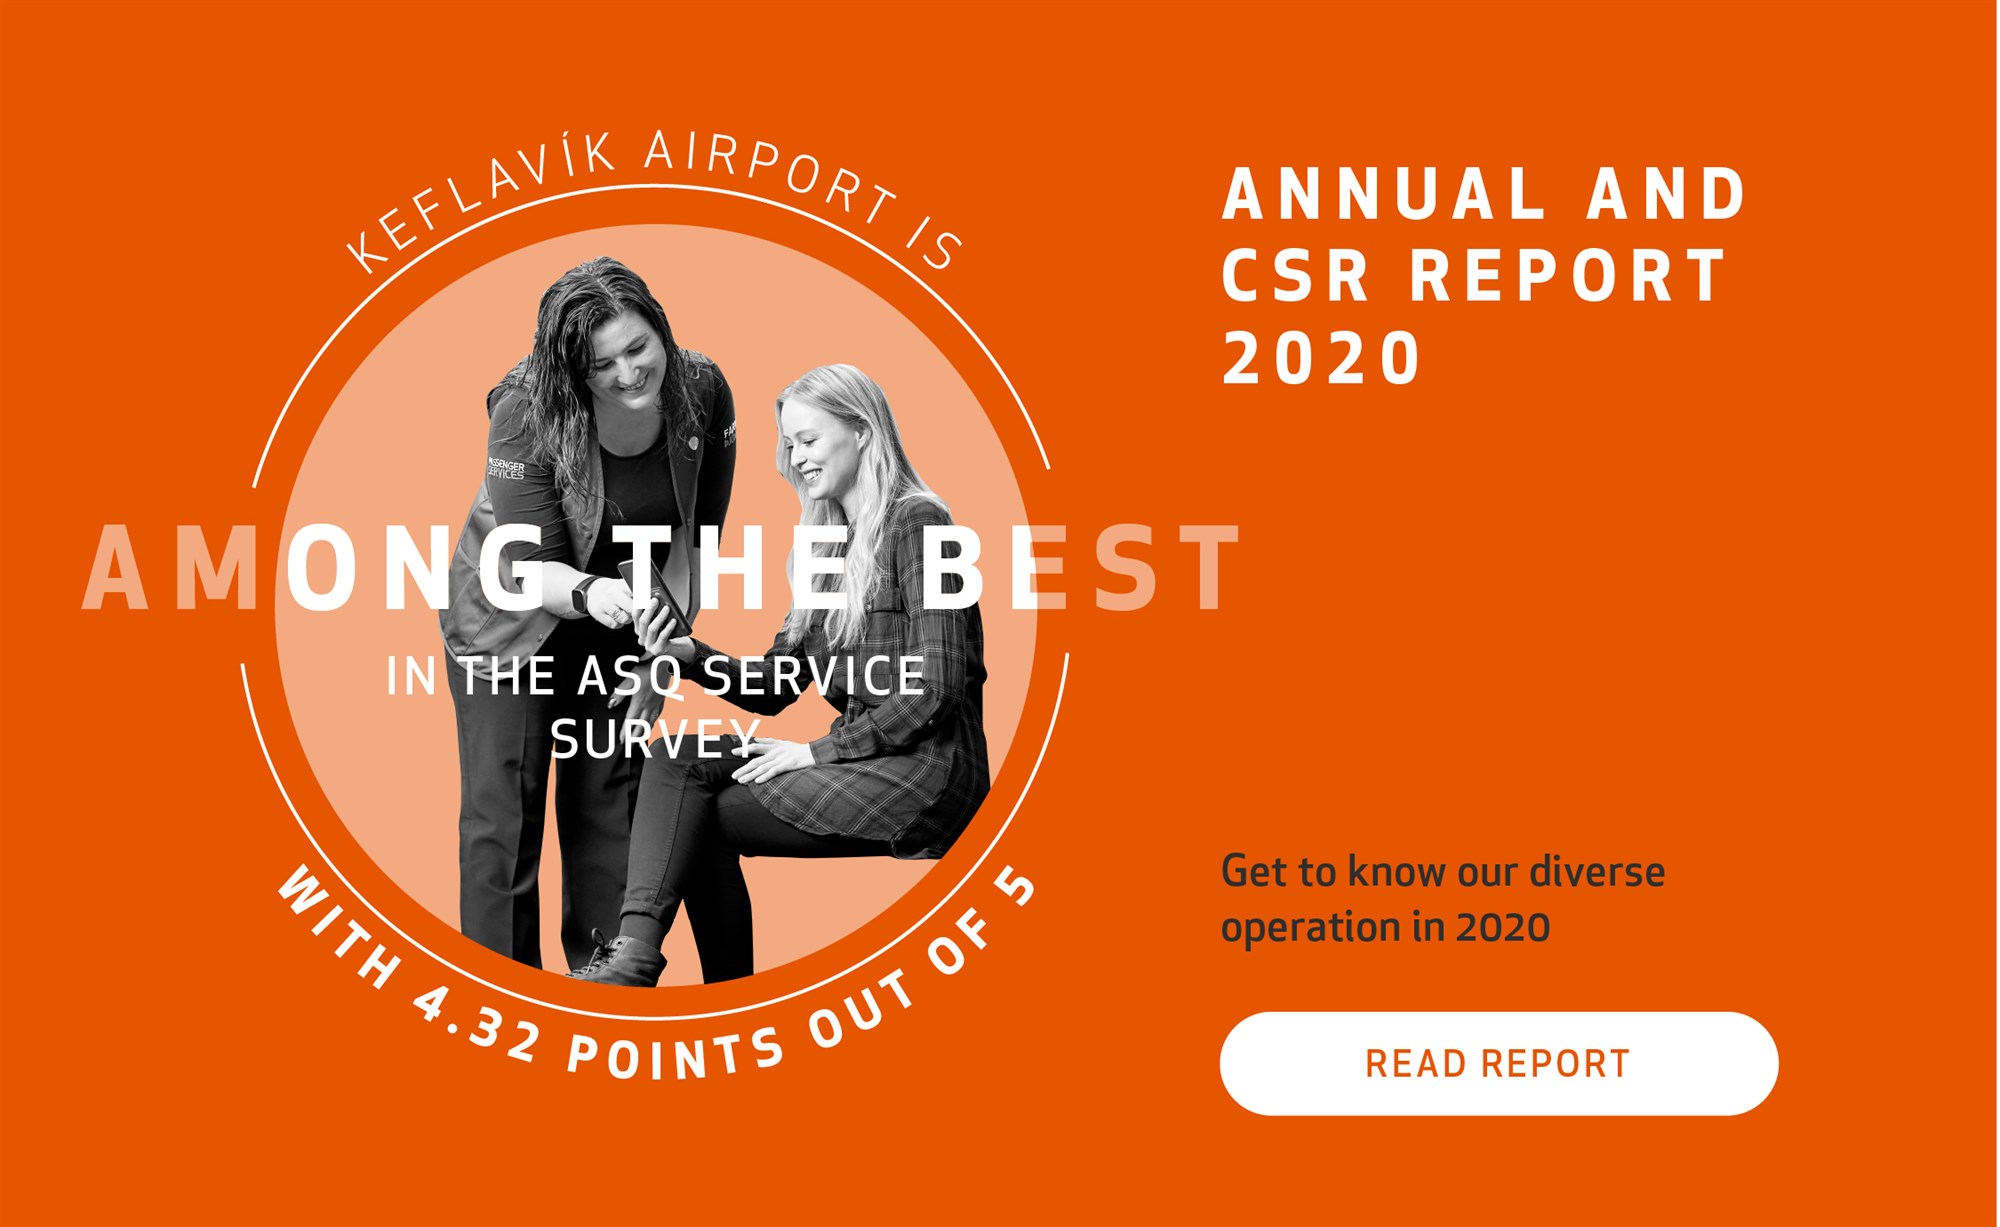 Isavia - Annual and CSR Report 2020 2